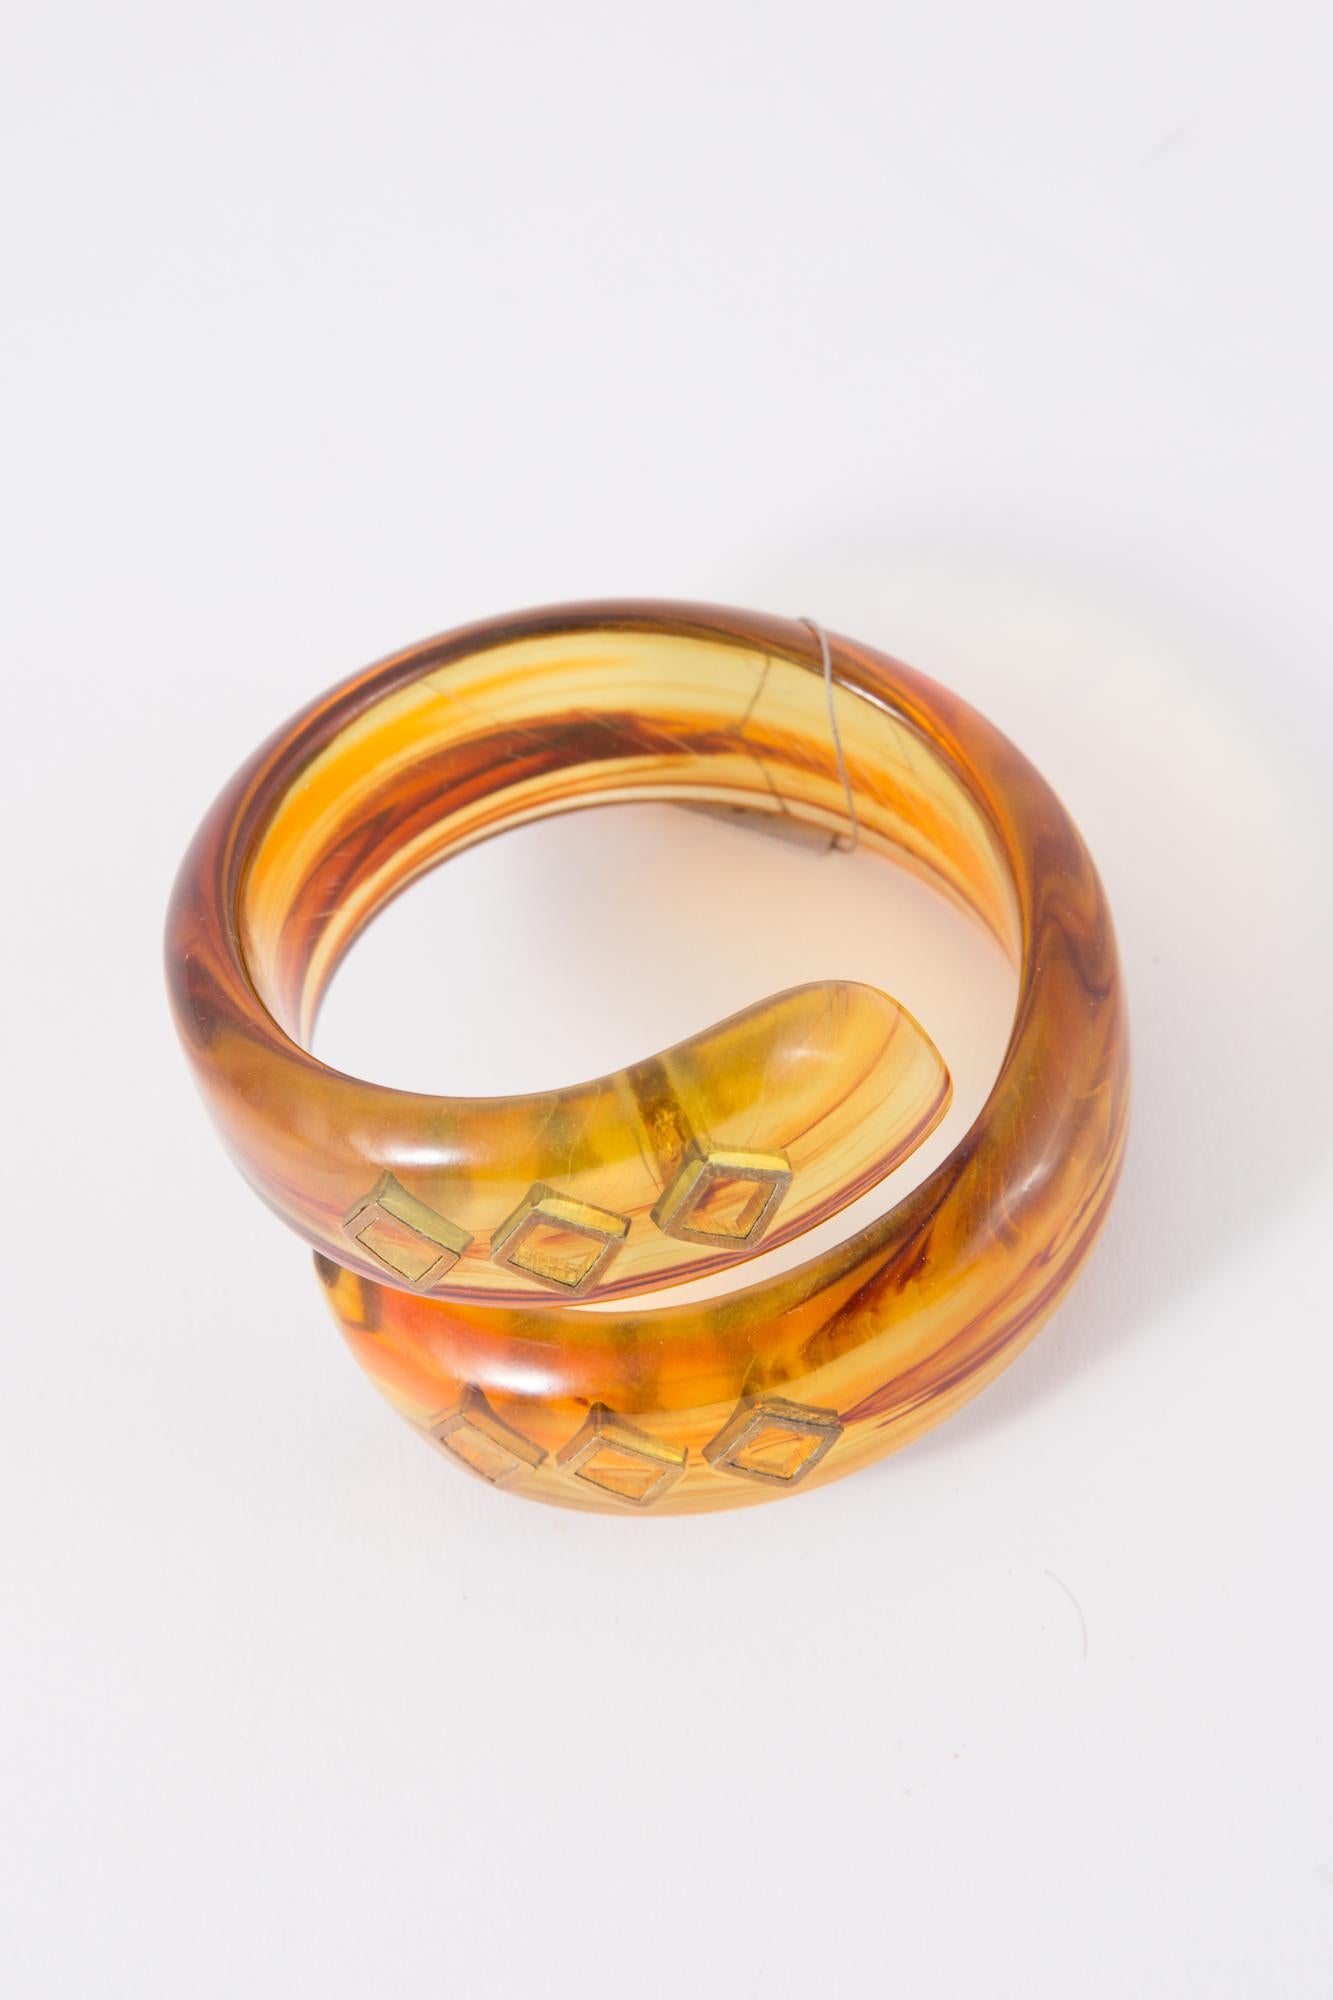 Pierre Cardin resin snake bracelet featuring a double raw, gold tone details, an inside plaque Pierre Cardin.
Circa: 1960s
In good vintage condition( some little scratches inside resin part)  
Diameter interior 2.3in. (6cm)
Front Maxi Heigth: 2.3in.